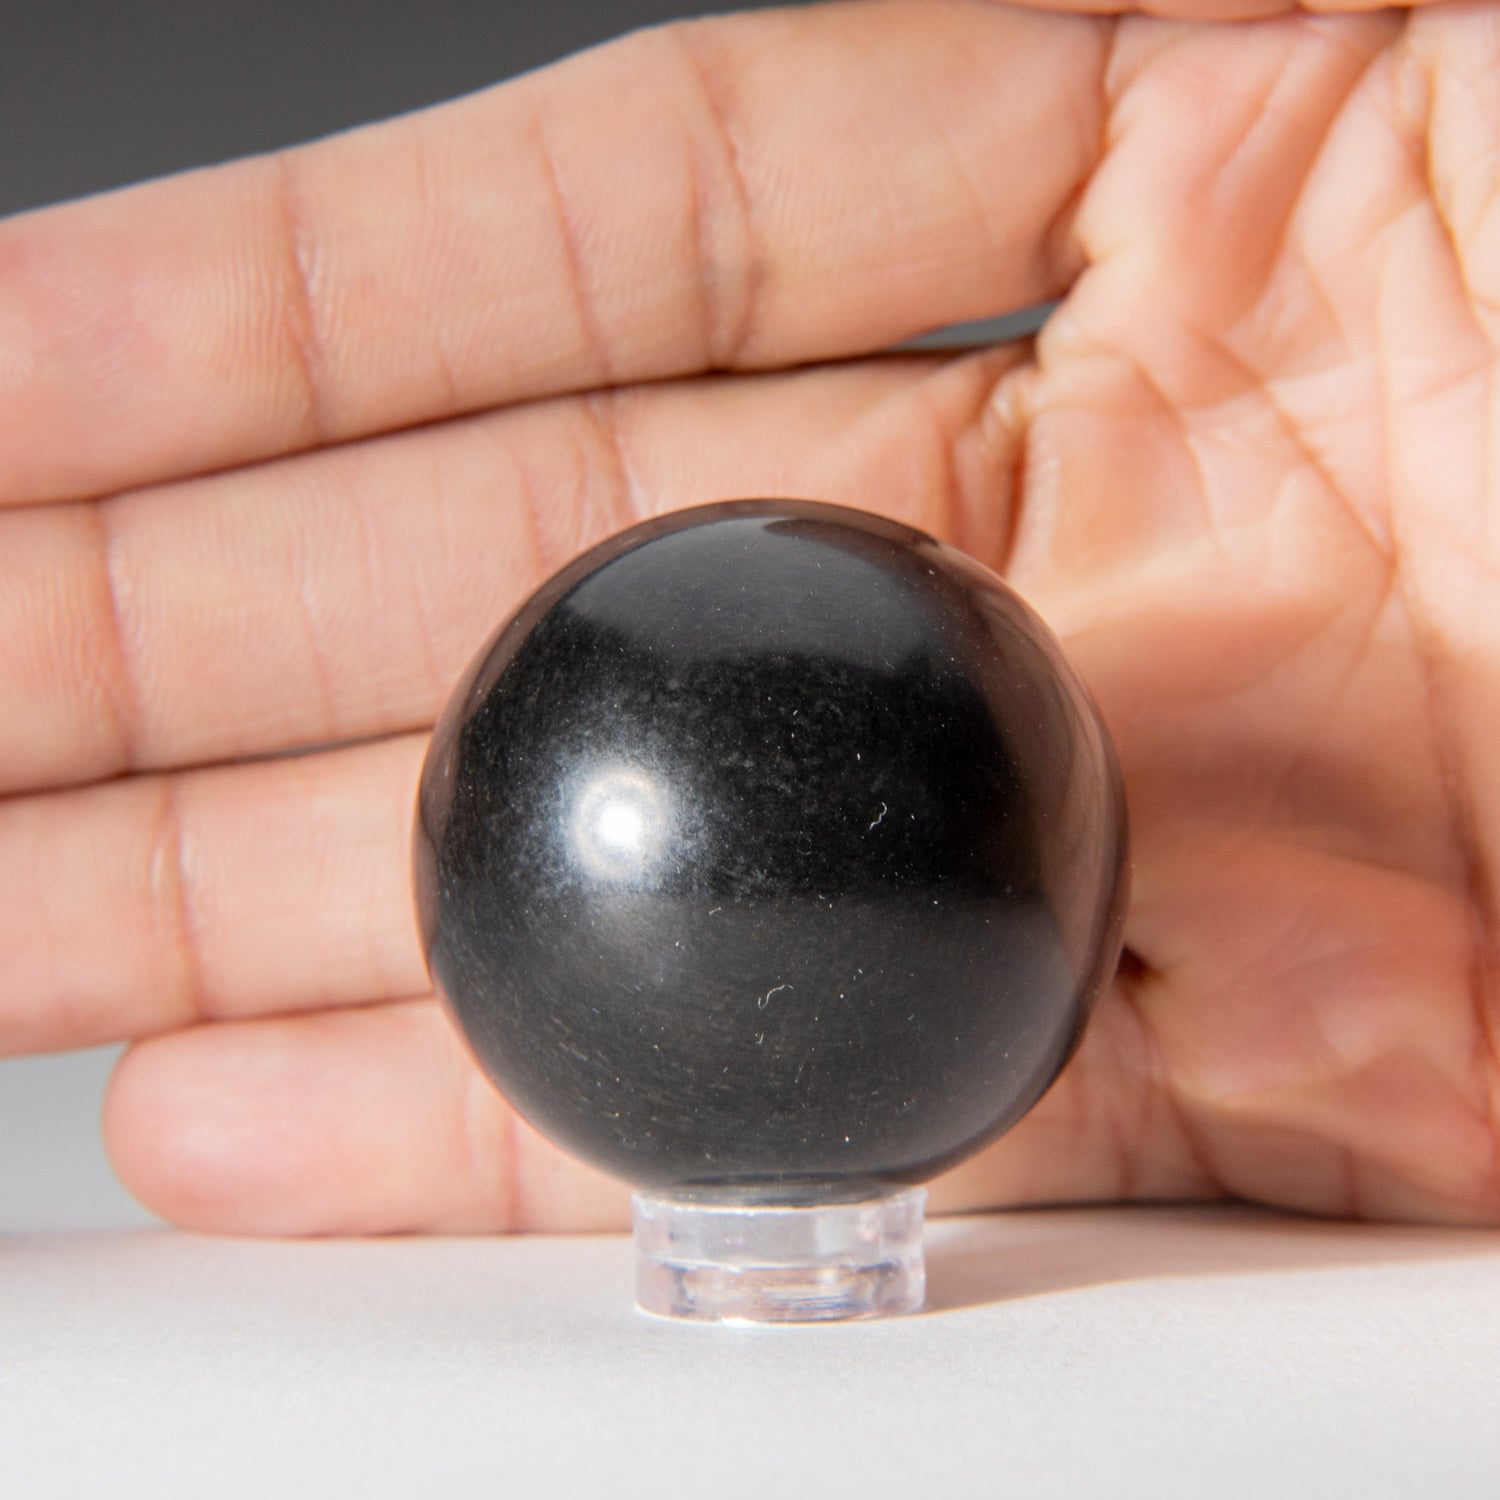 Genuine Polished Pyrite Stone Sphere (1.25") with Acrylic Display Stand